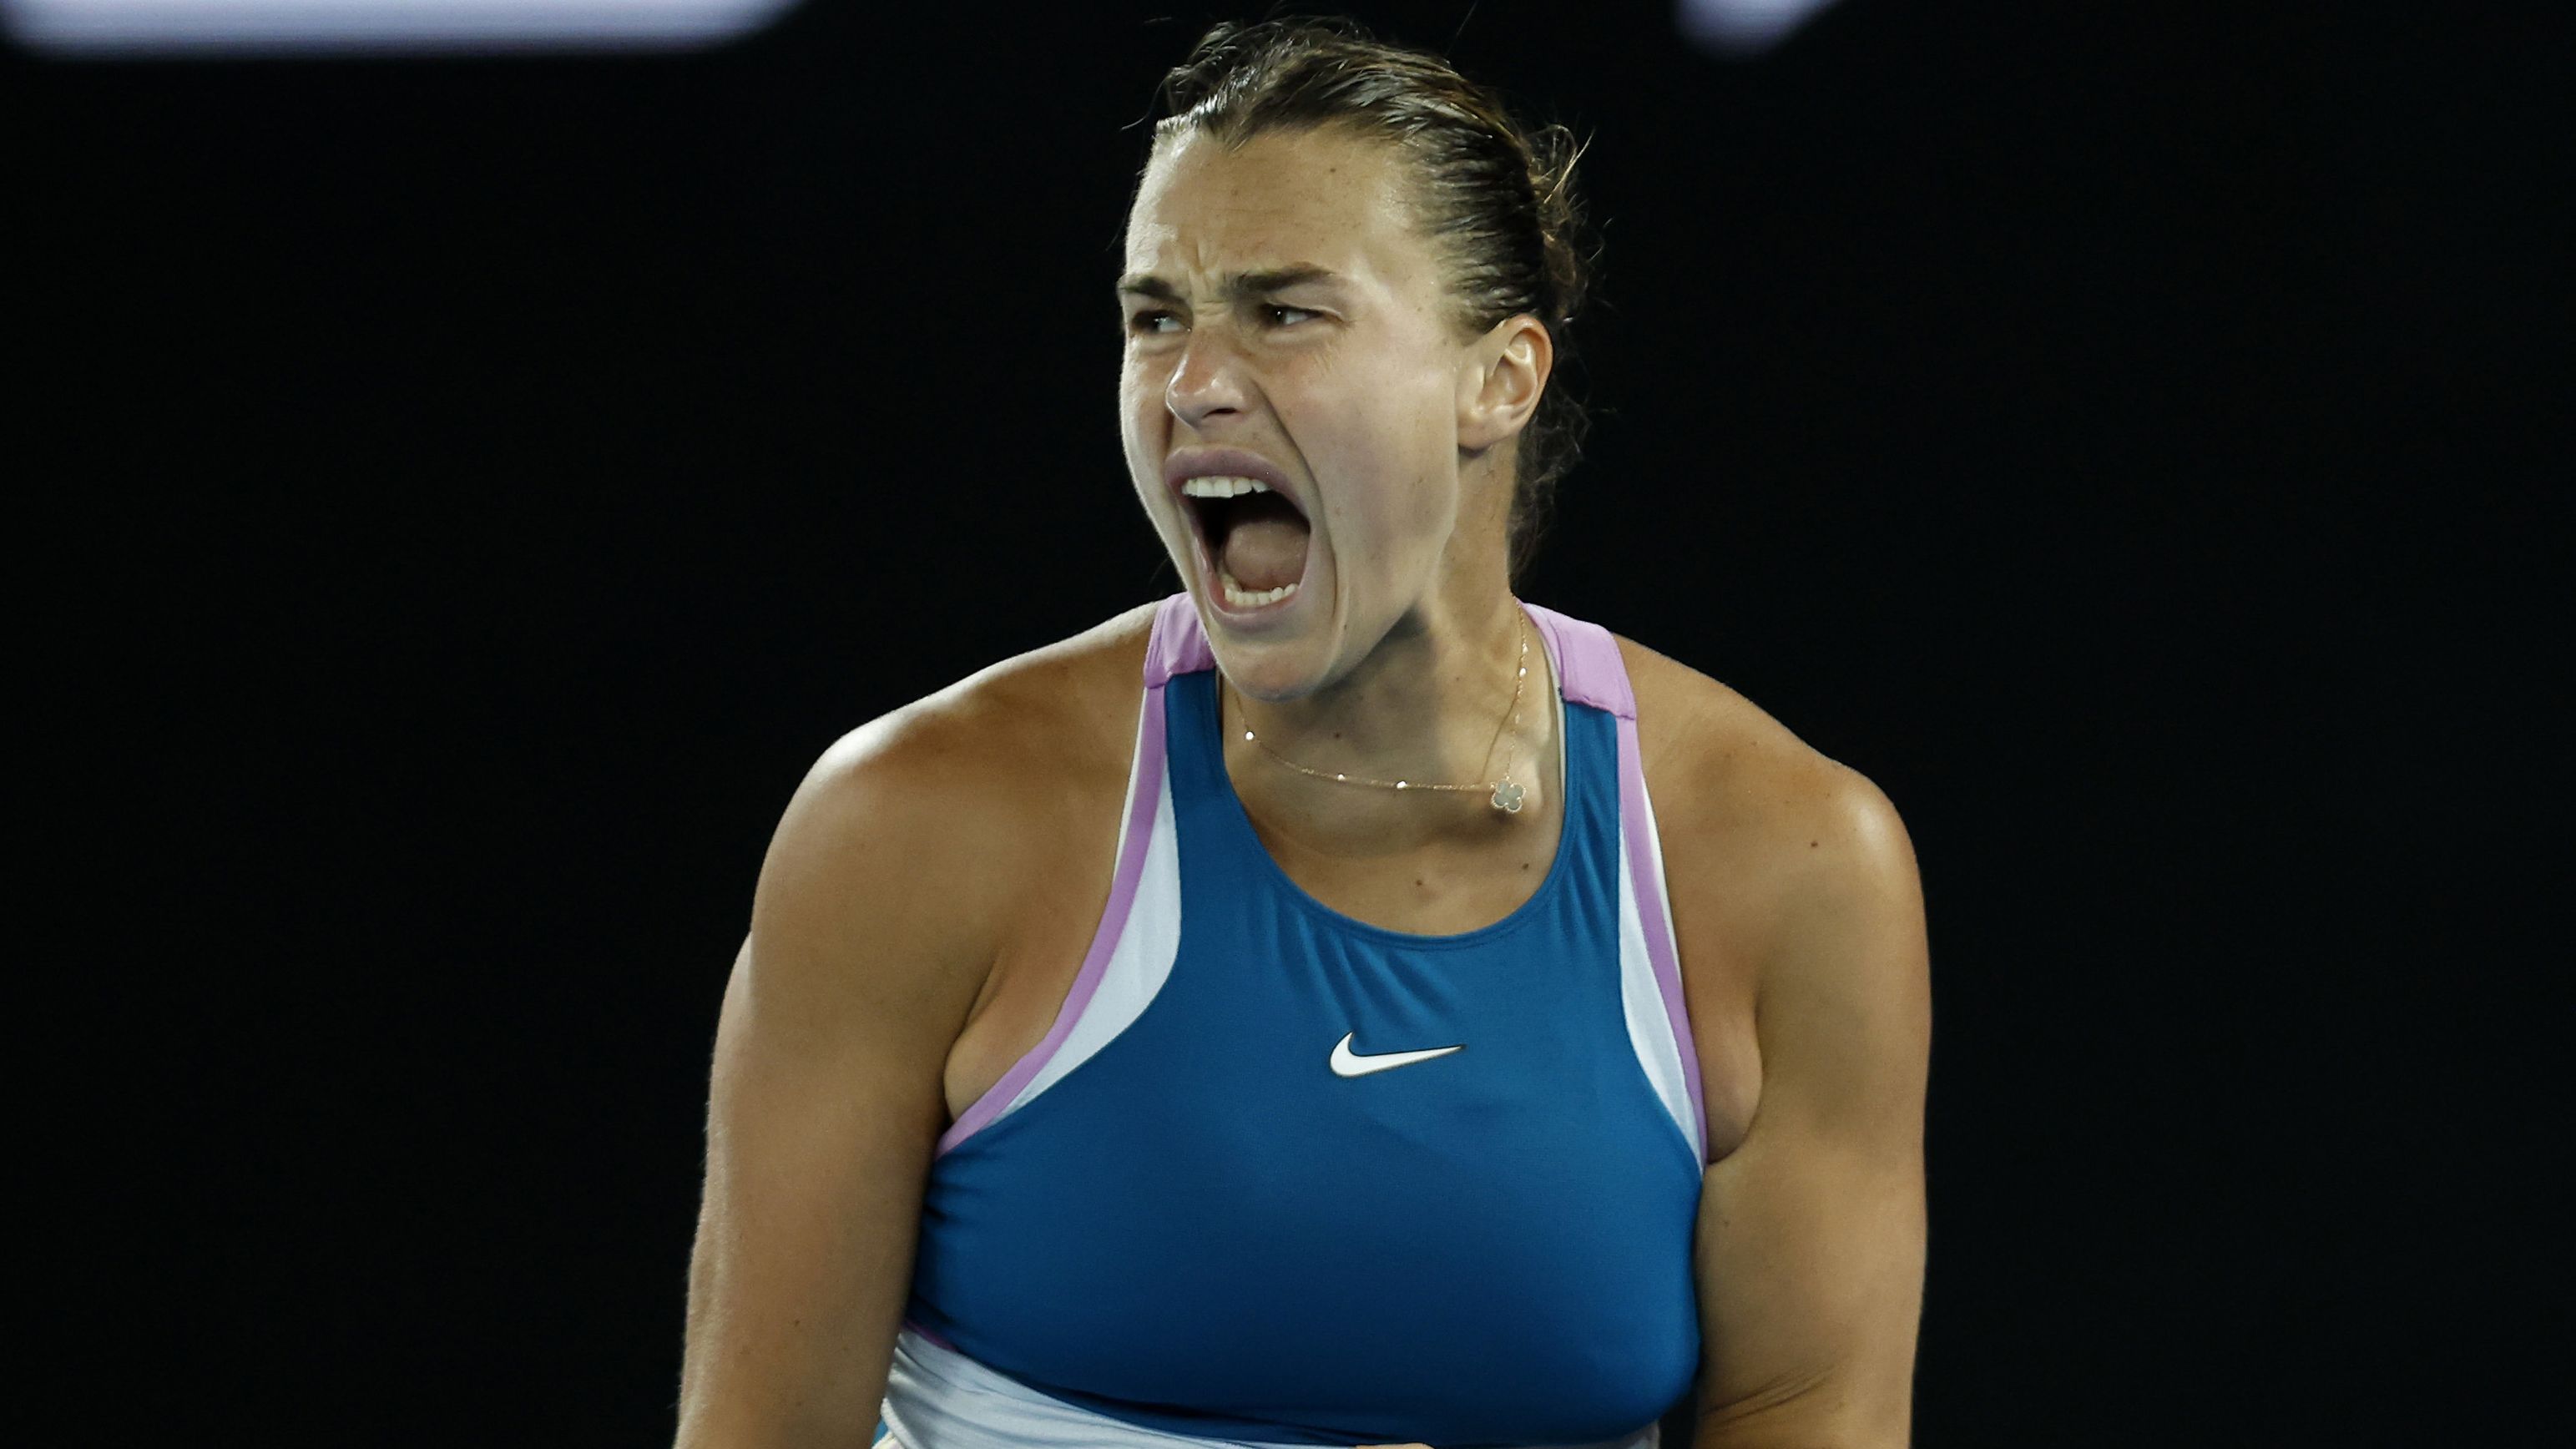 Aryna Sabalenka beats Magda Linette of Poland to reach the final. (Photo by Darrian Traynor/Getty Images)